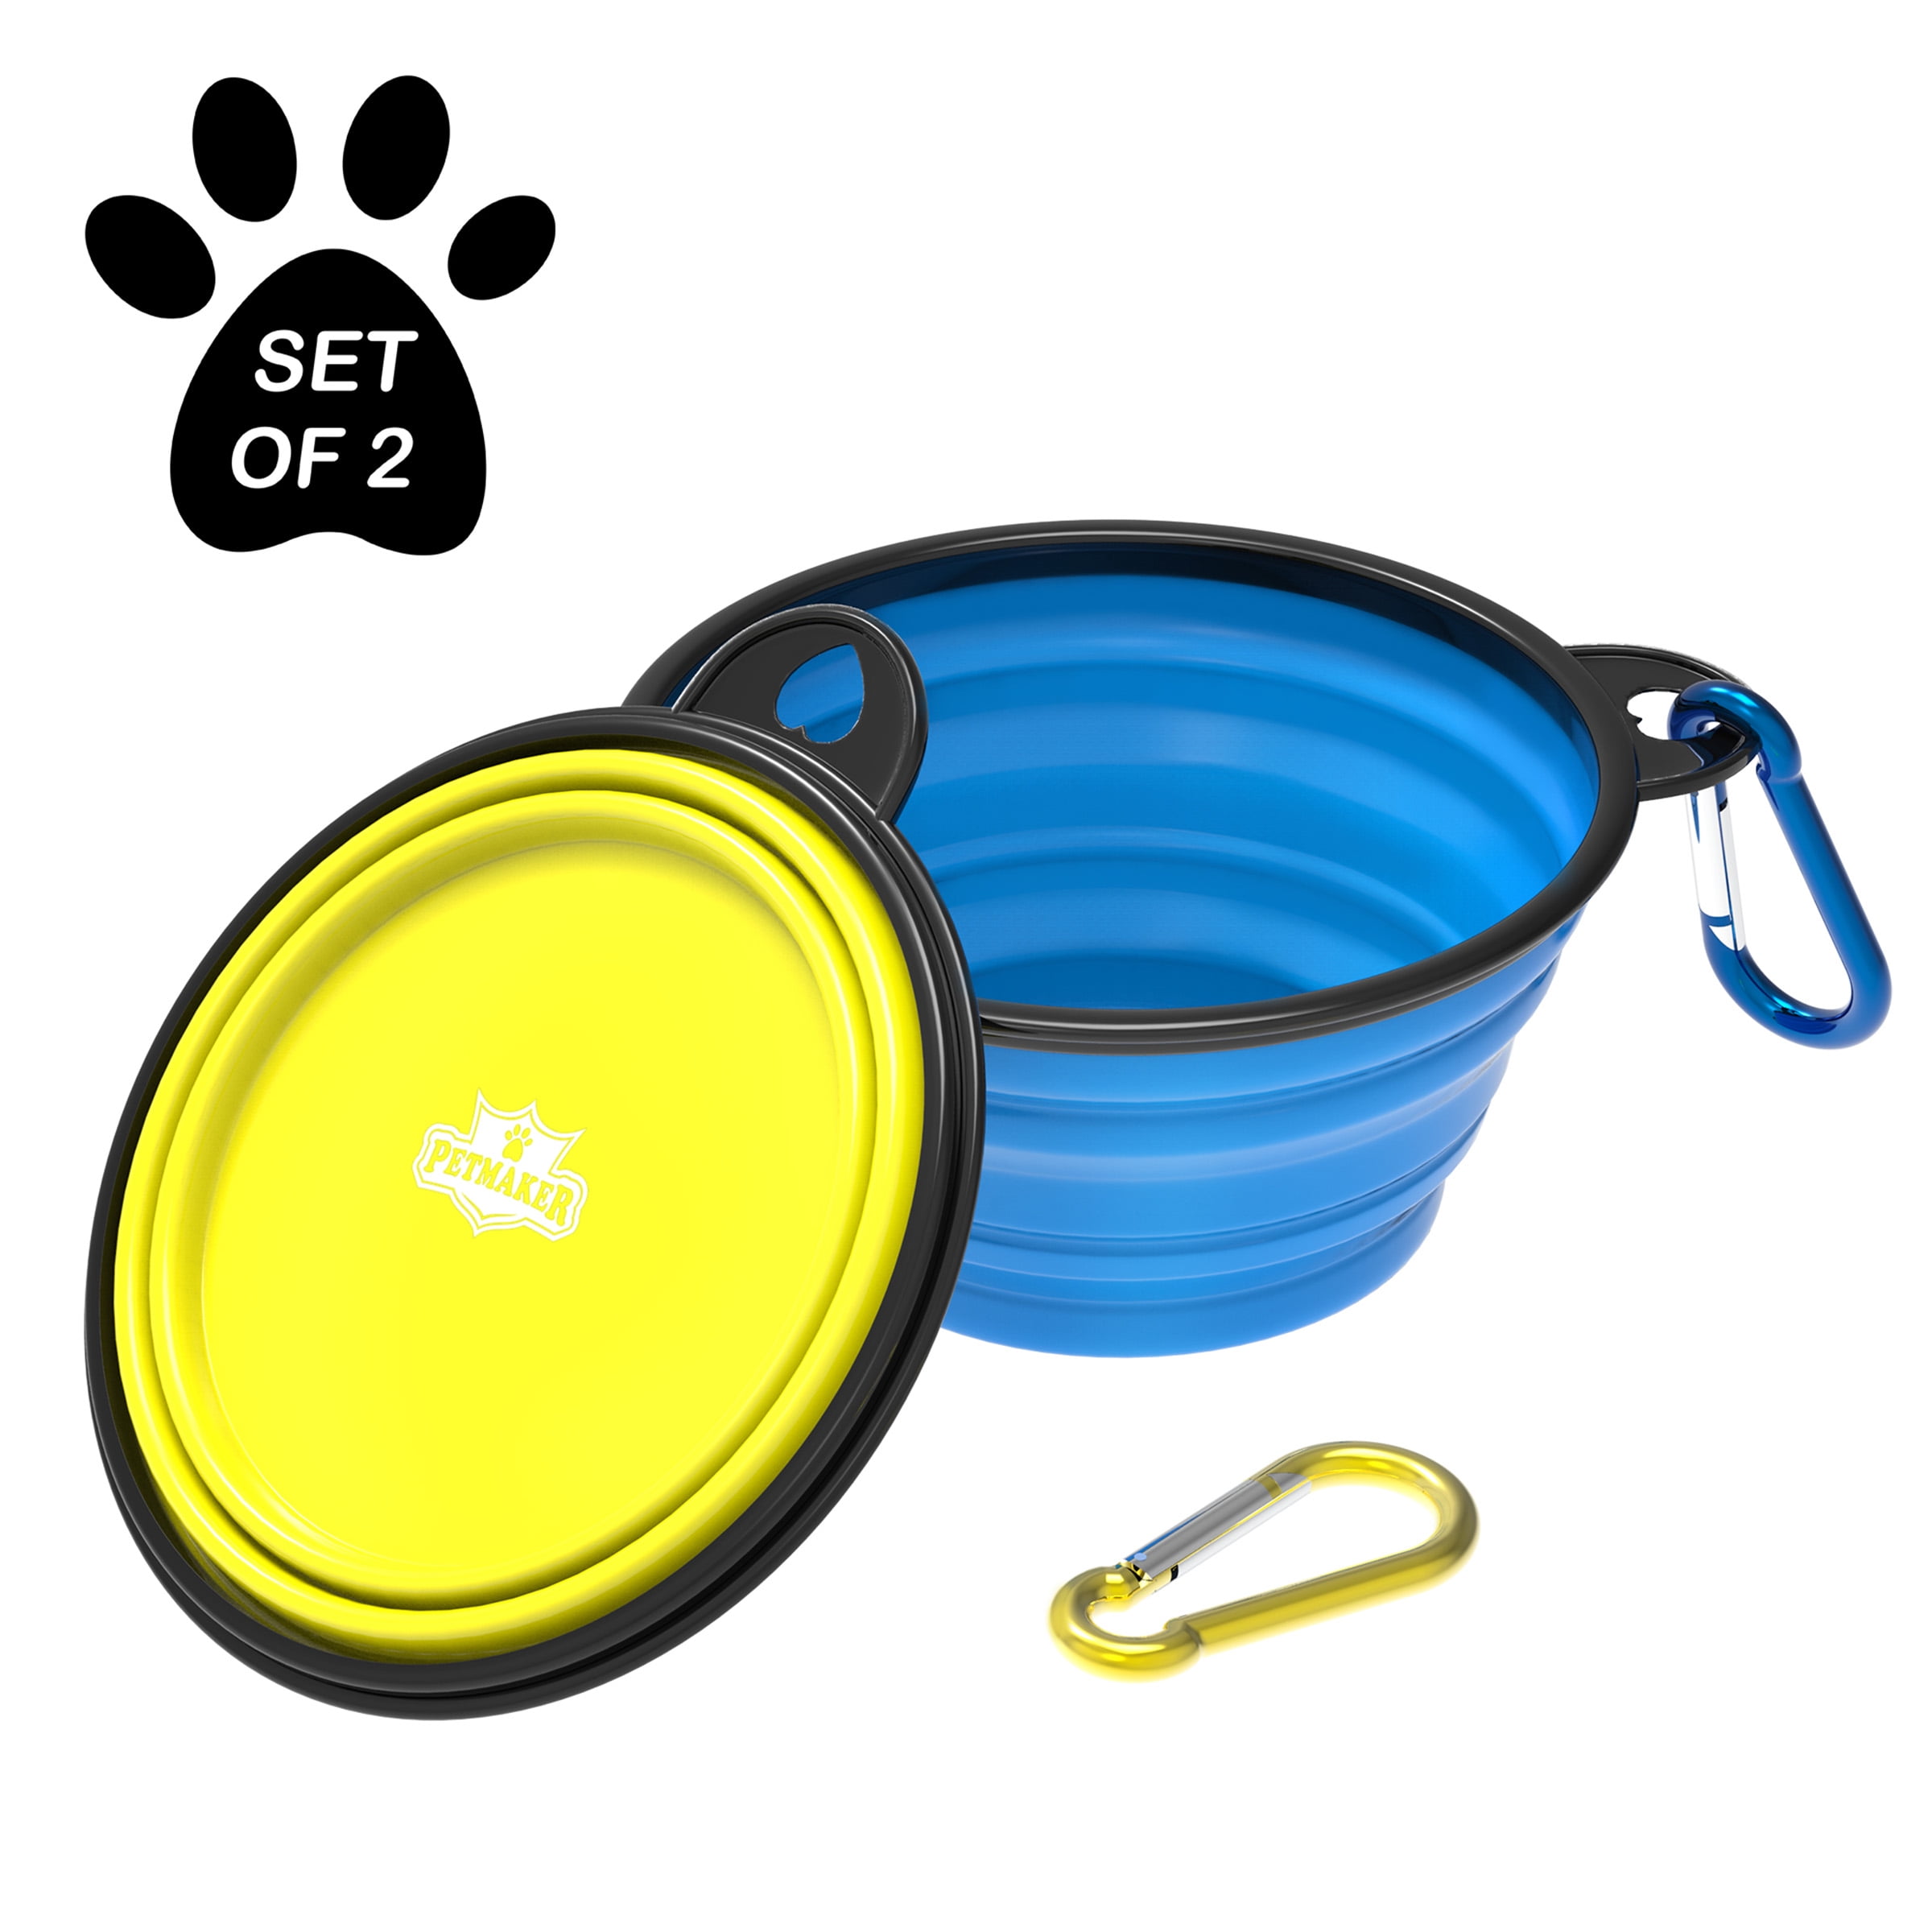 wonderflowers New Collapsible Pet Cat Dog Dish Water Feeder Silicone Travel Feeding Bowl Free Carabiner Purple Color 